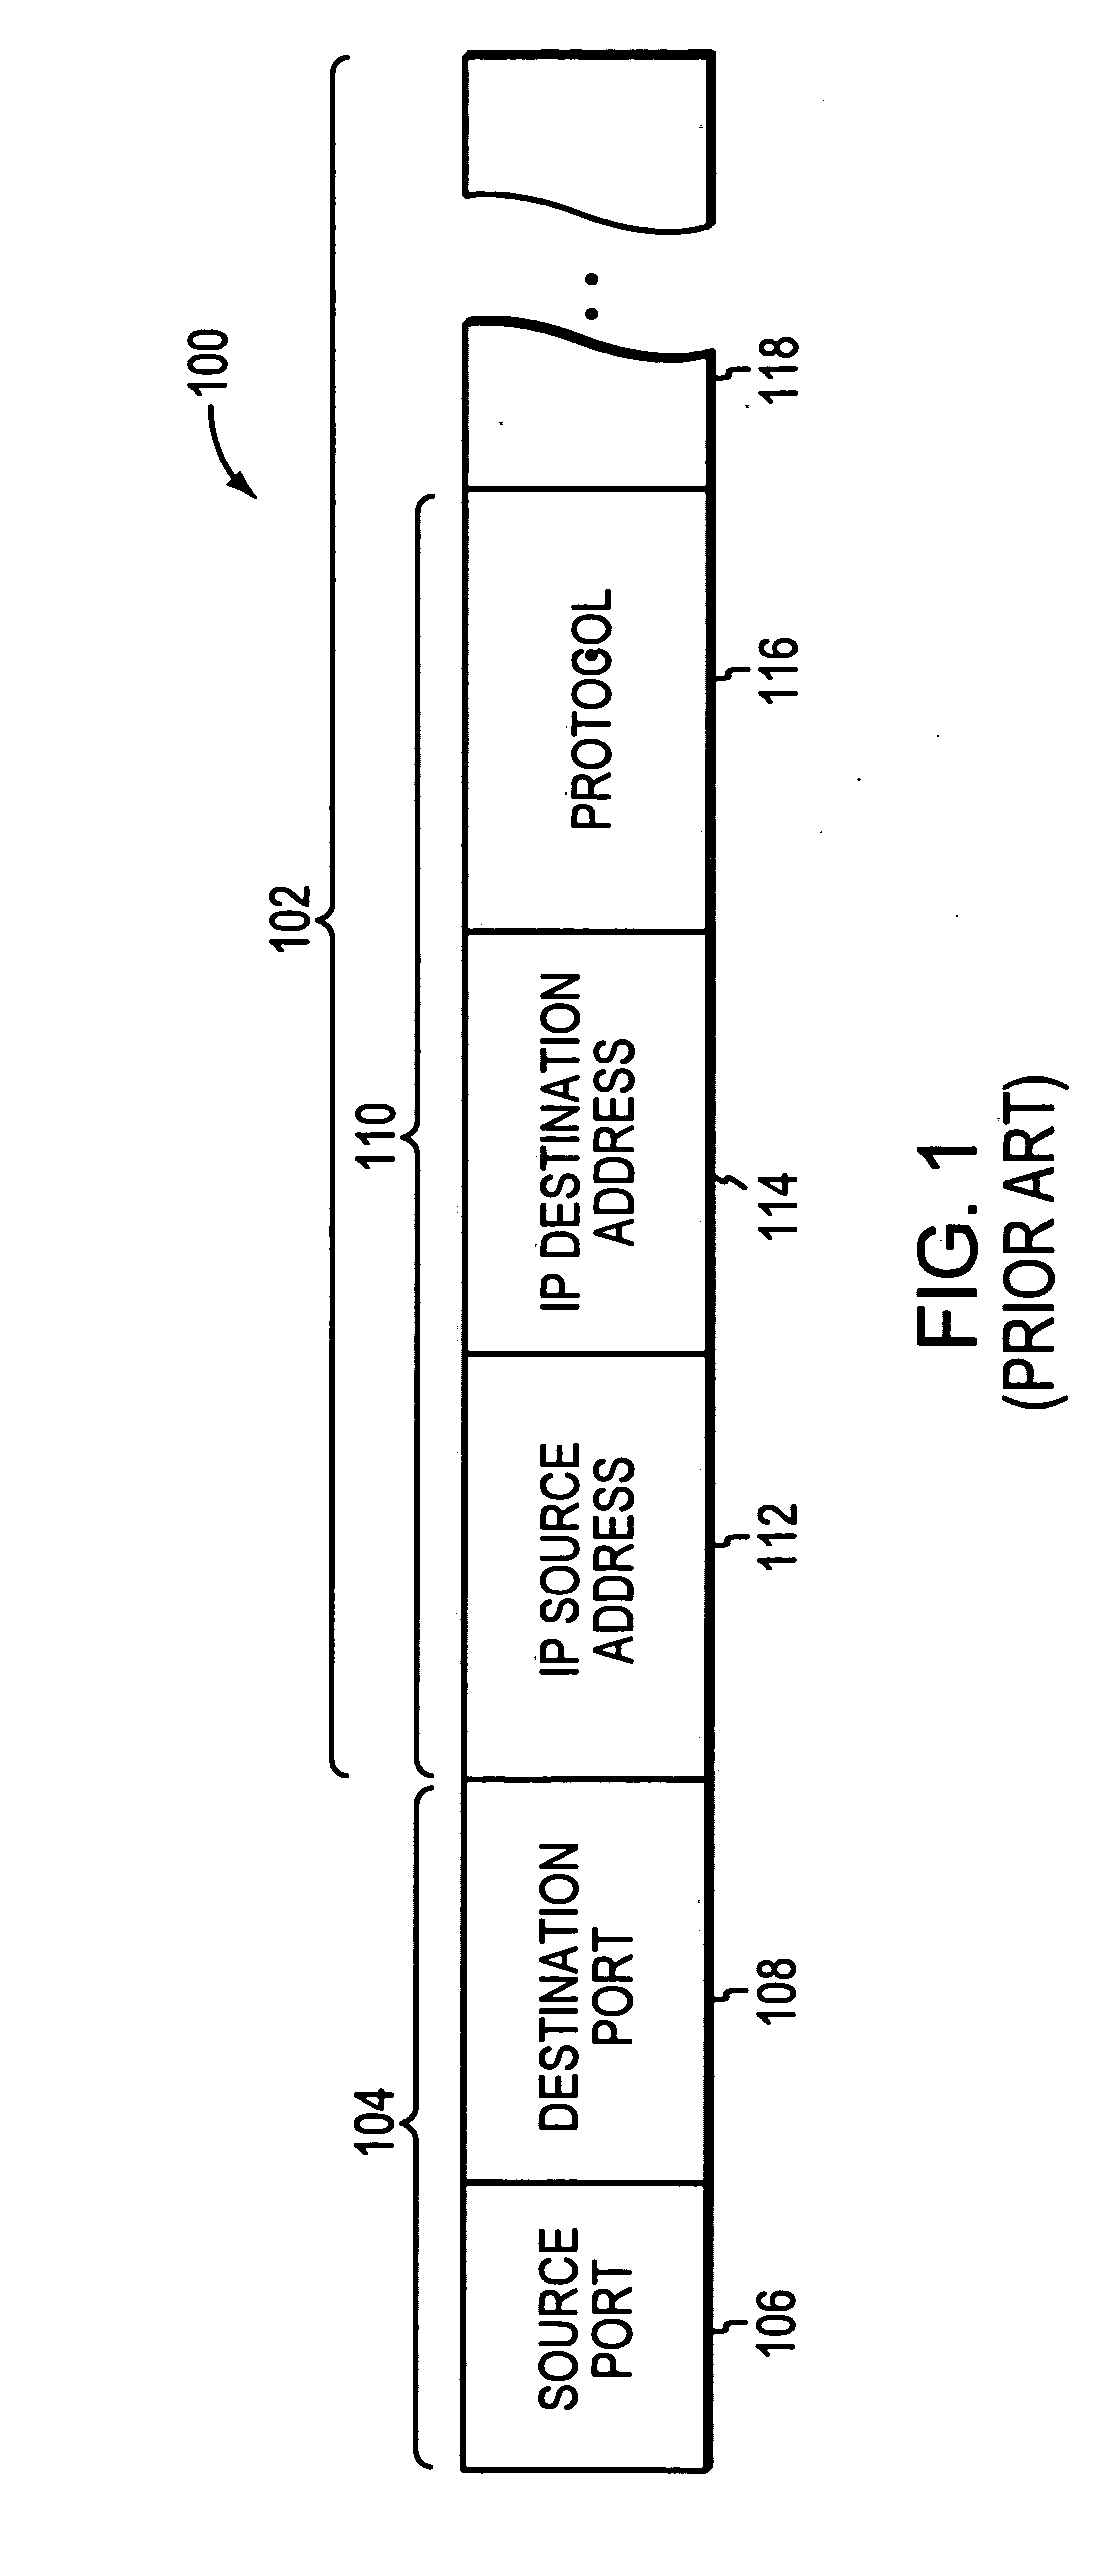 Hierarchical associative memory-based classification system